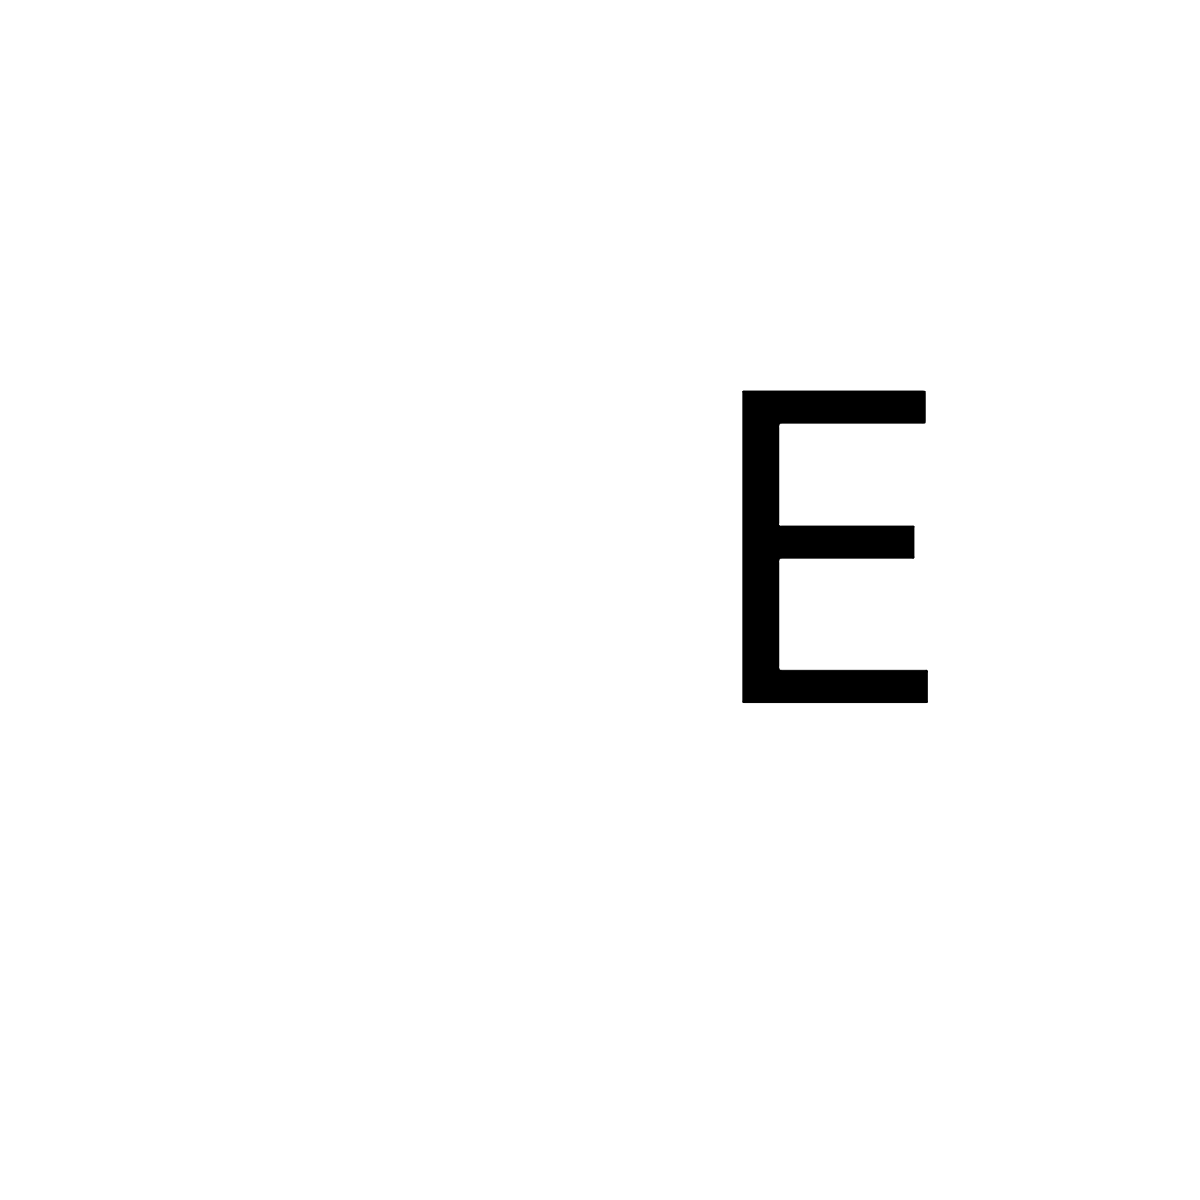 Experiencer